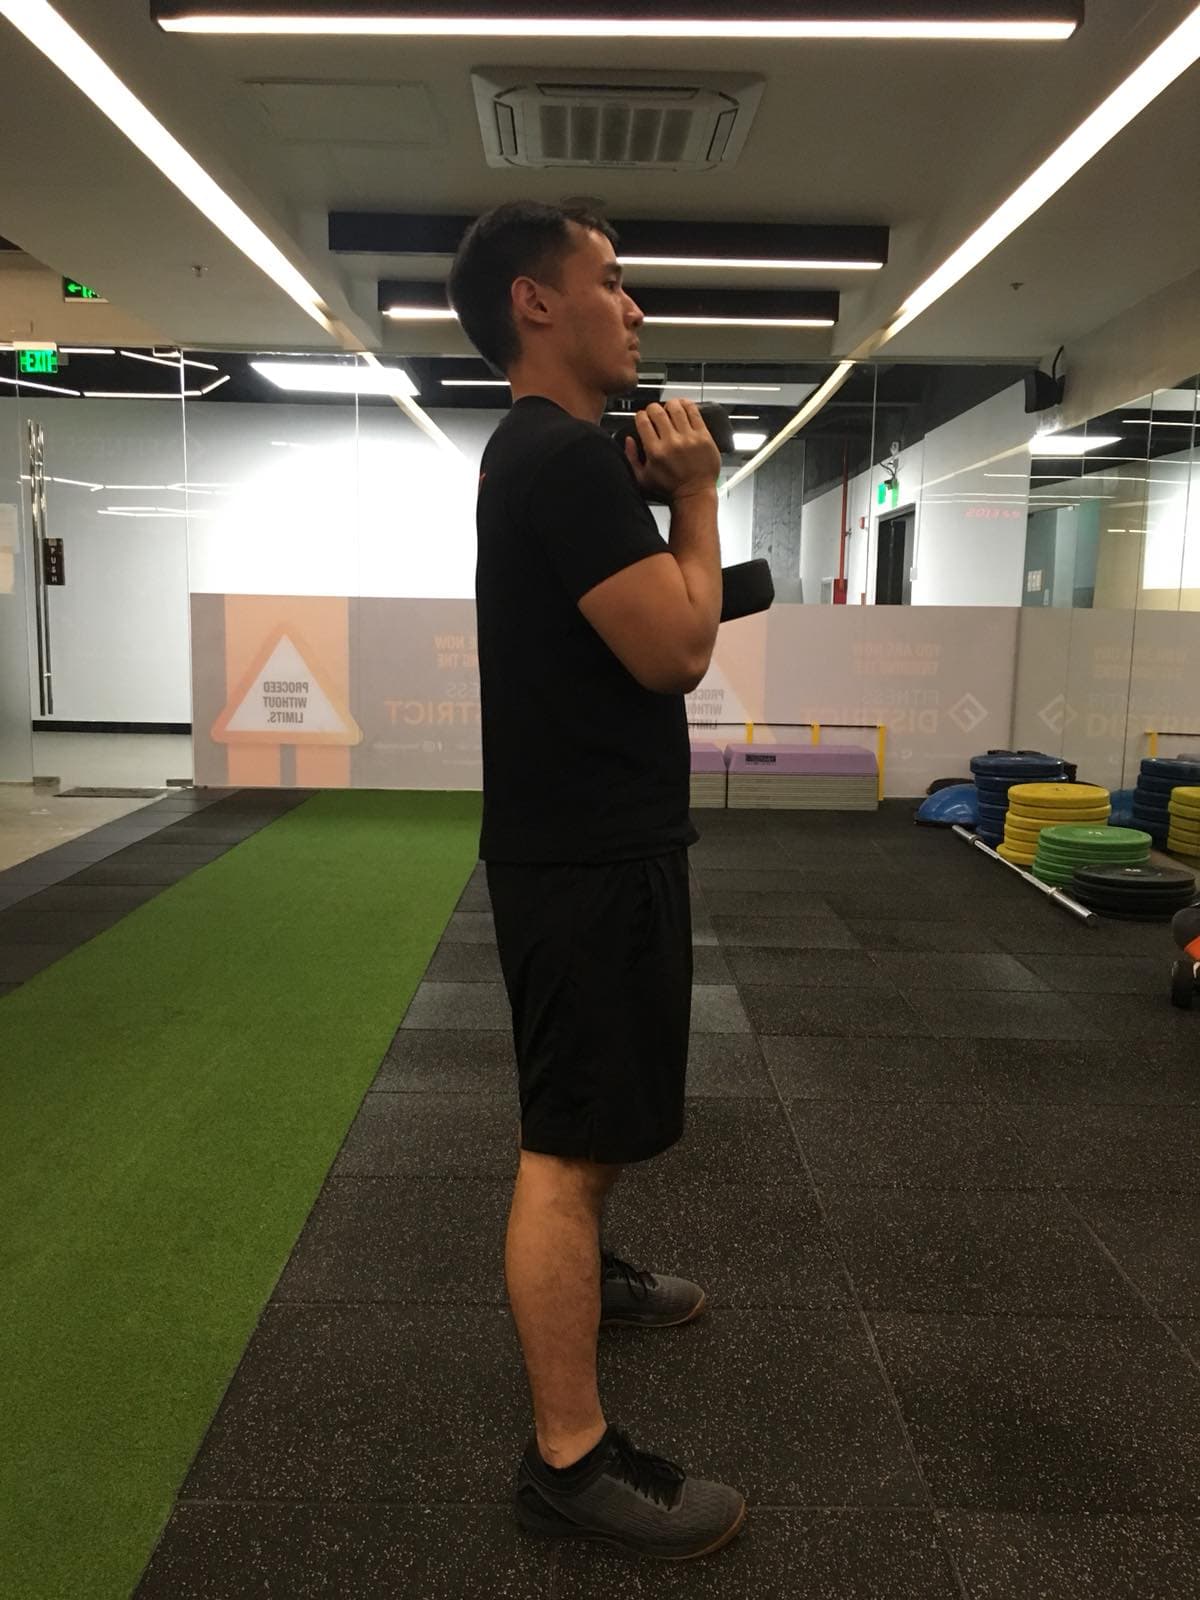 The goblet squat strengthens the muscles in the lower body